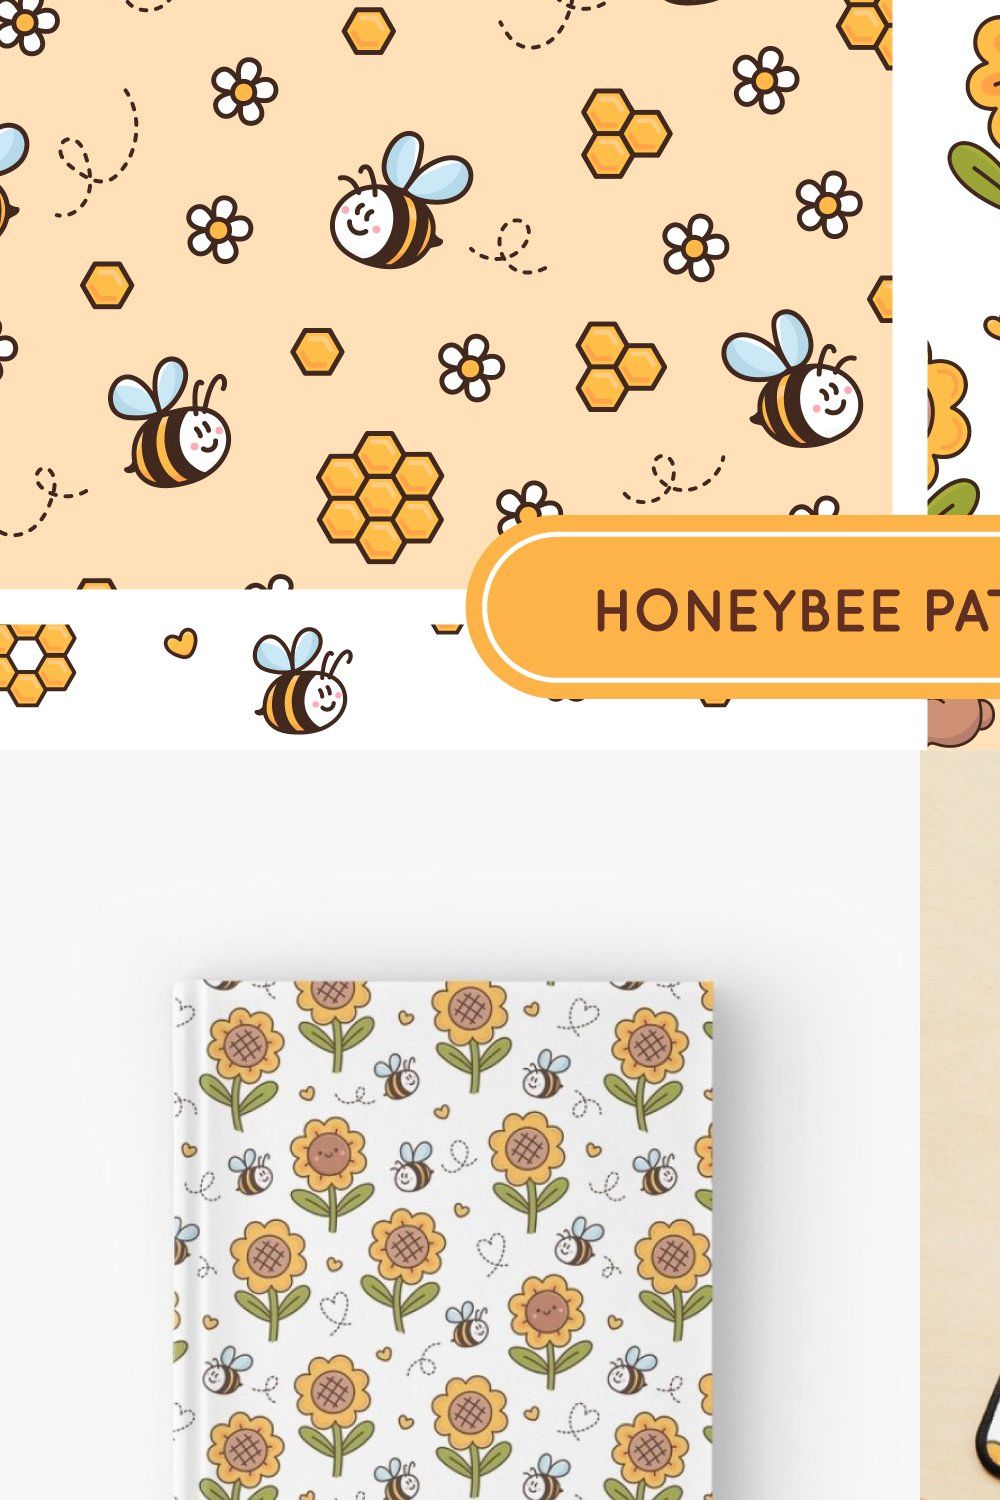 Honey bee patterns pinterest preview image.